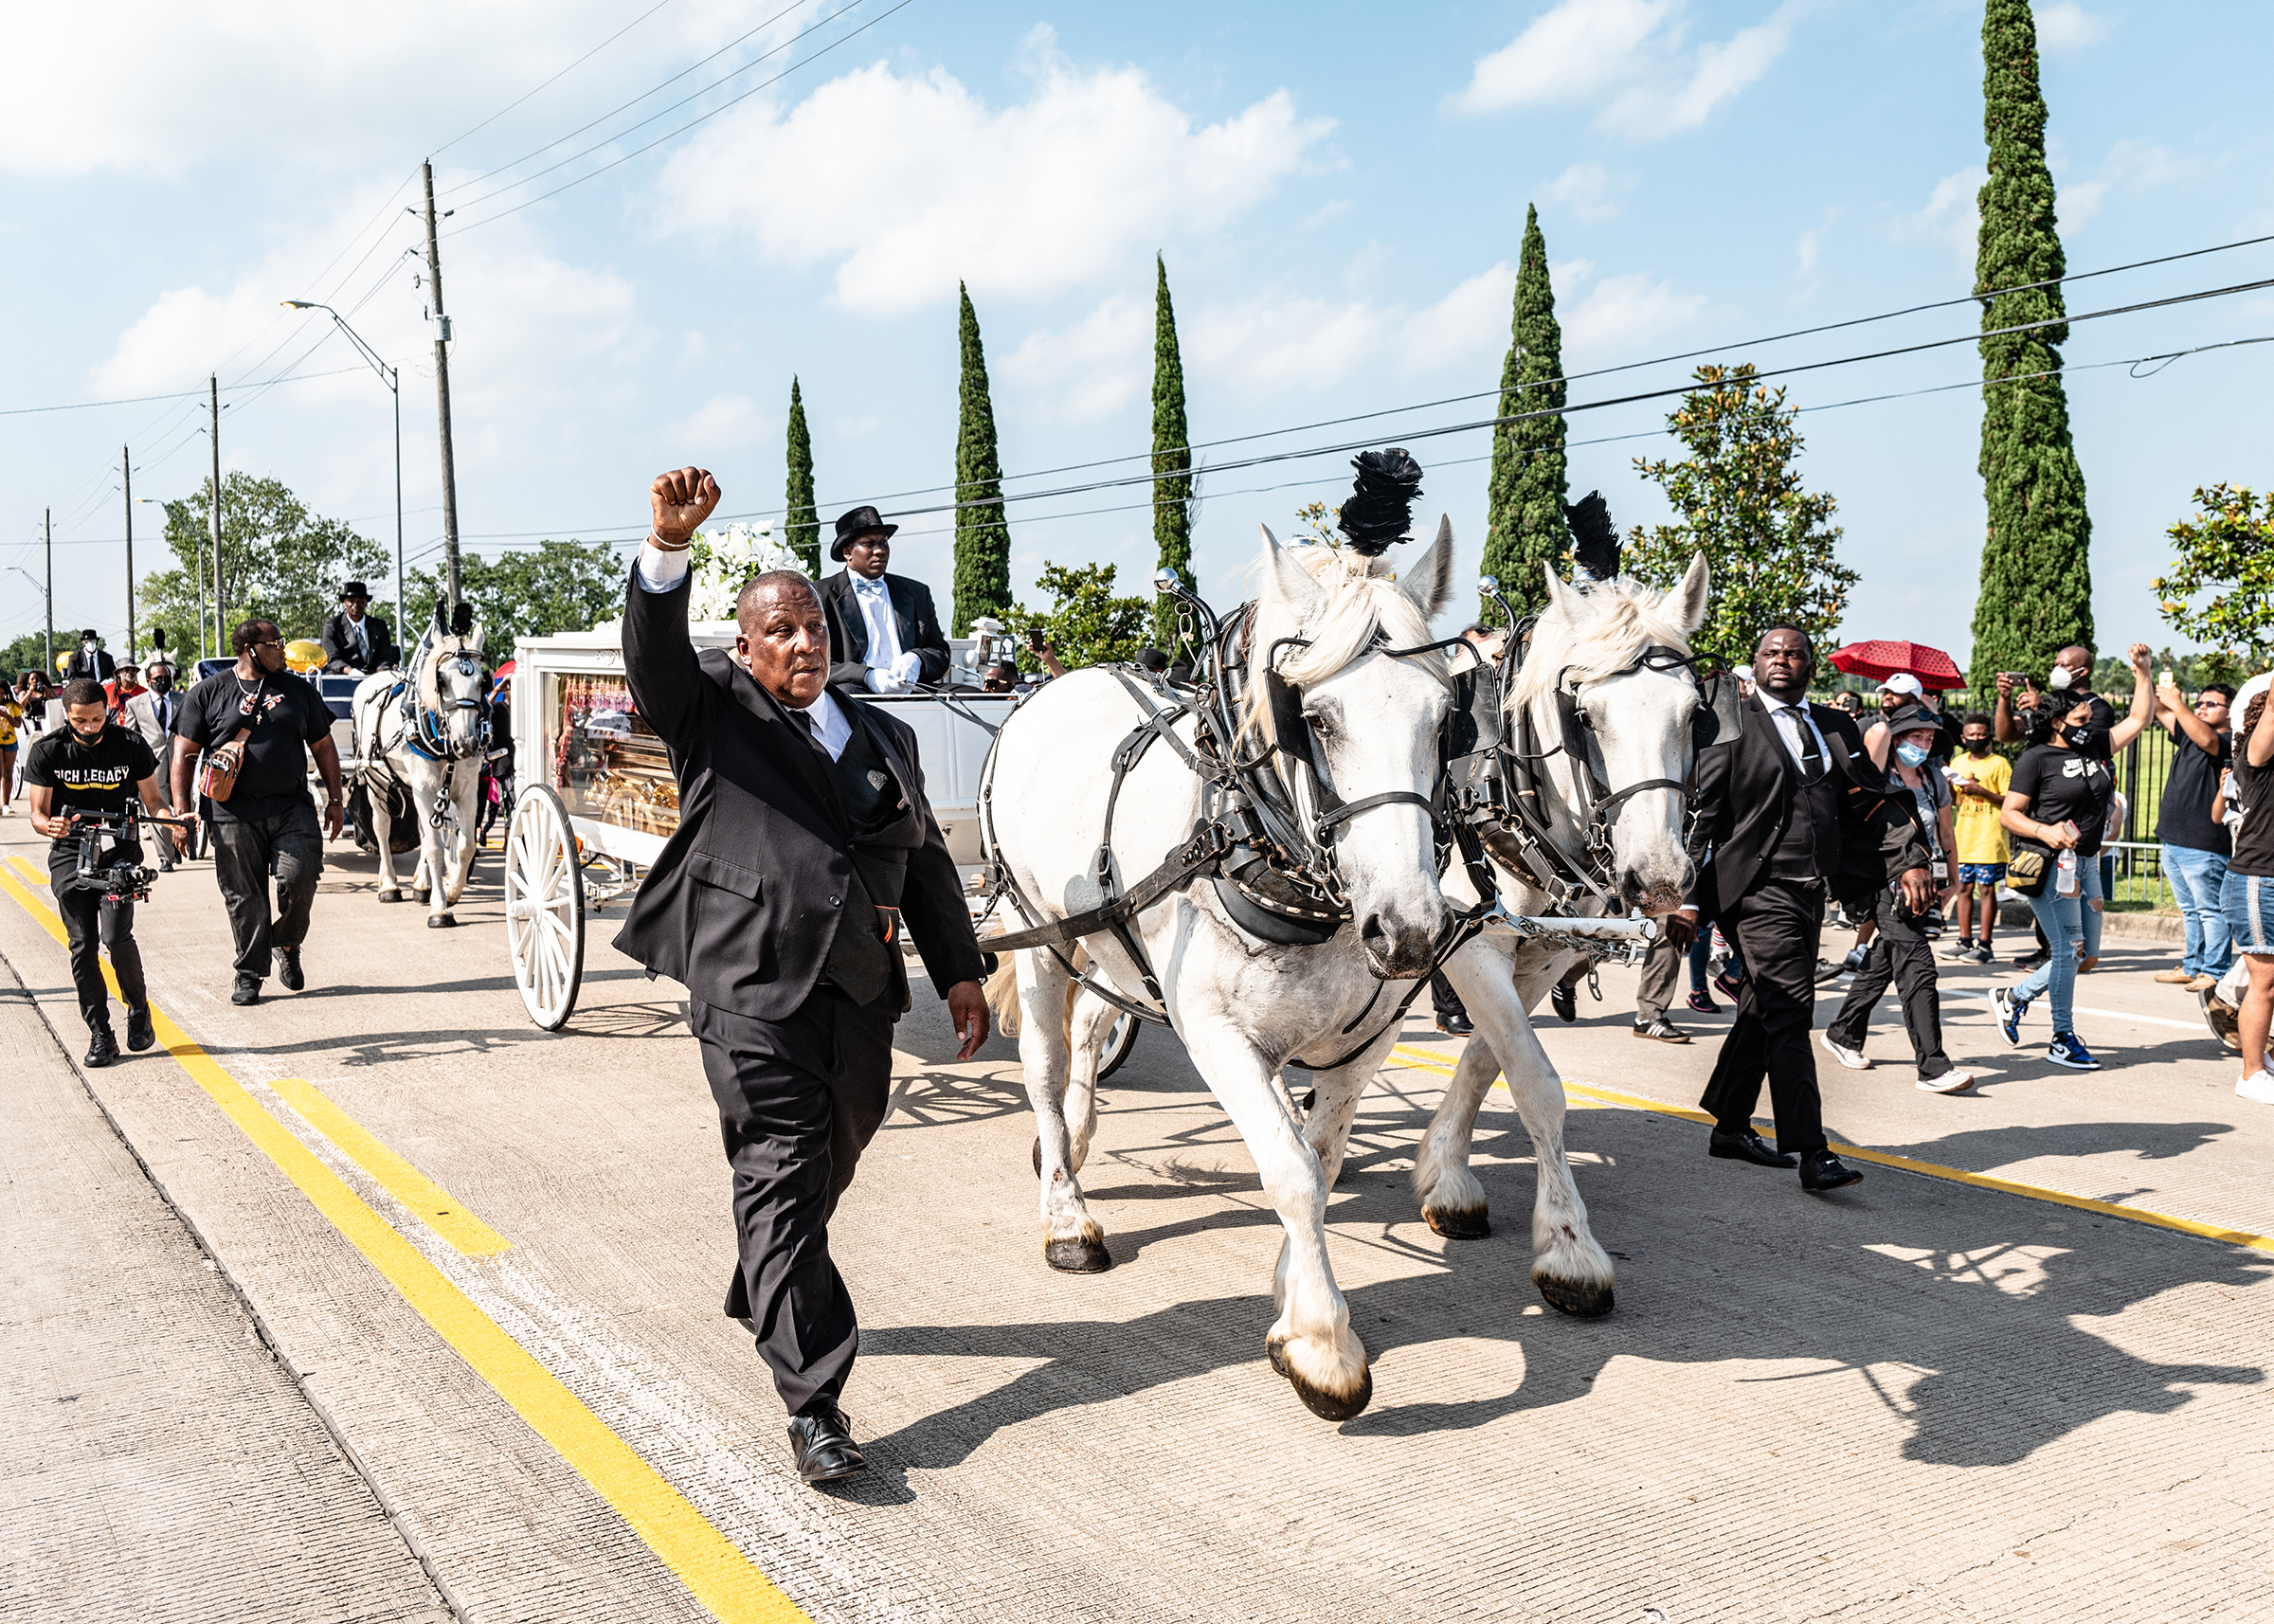 A horse-drawn carriage brought Floyd’s body into the cemetery on June 9. “It felt like a state funeral,” Roye said. “It felt like they were sending him off with the newfound persona that he had been catapulted into, and this was one of the ways to honor what he became. It felt right.” (Ruddy Roye for TIME)